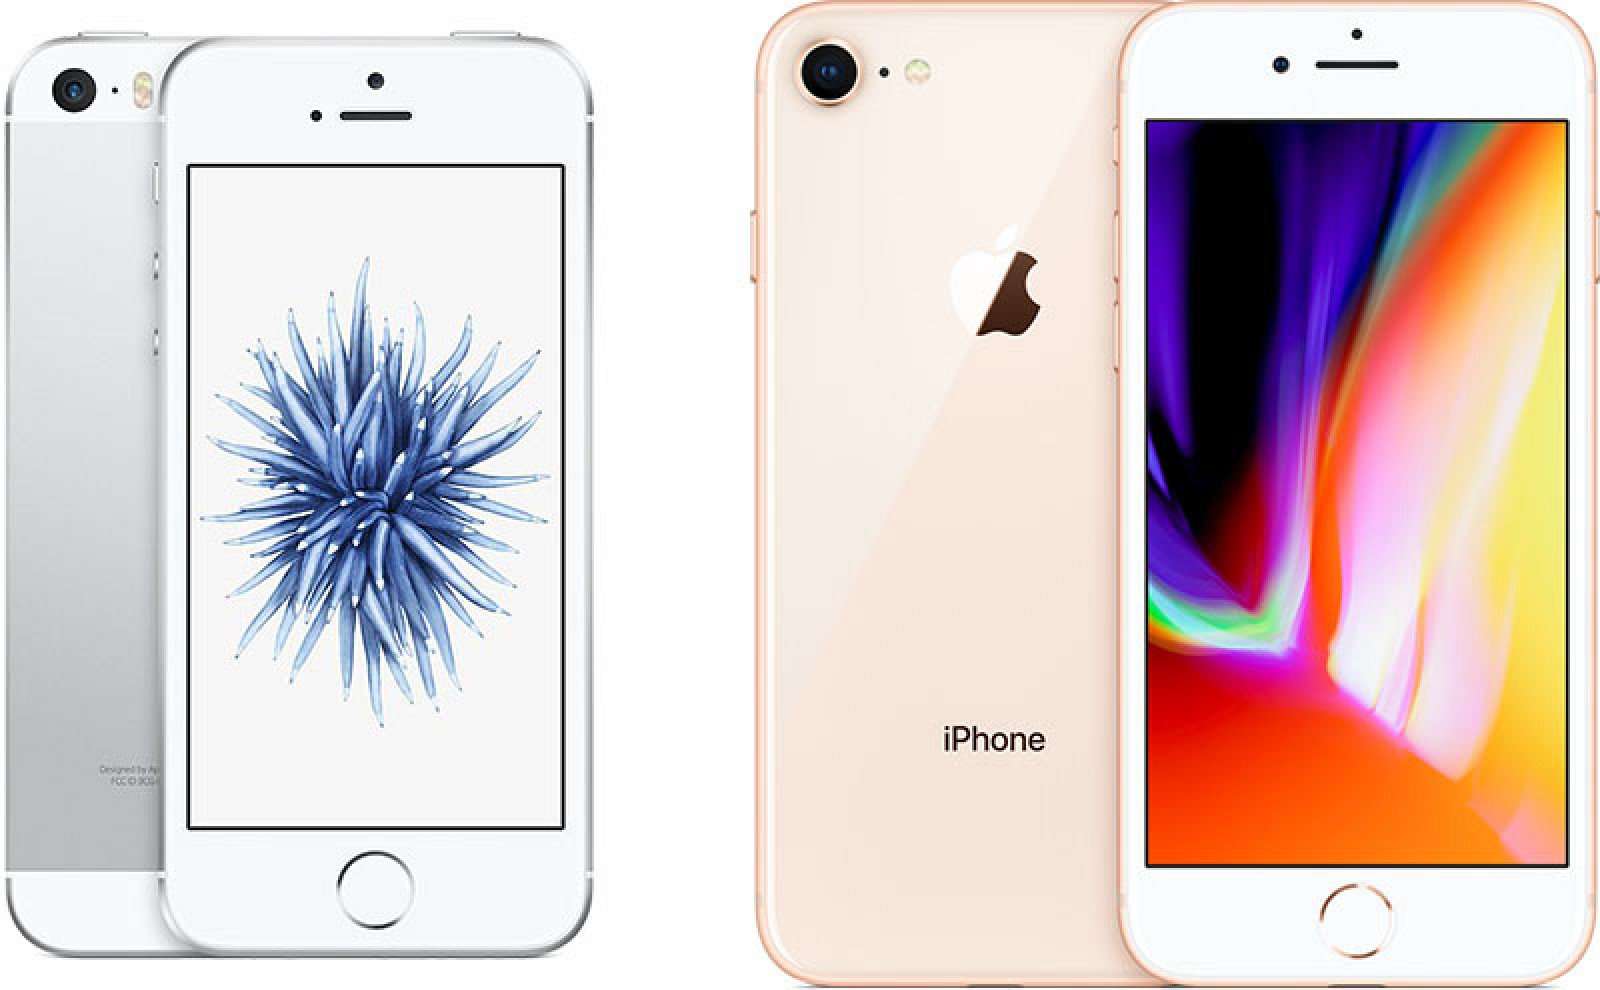 image for Kuo: iPhone SE 2 Launching in Q1 2020 with A13 at $399 Price